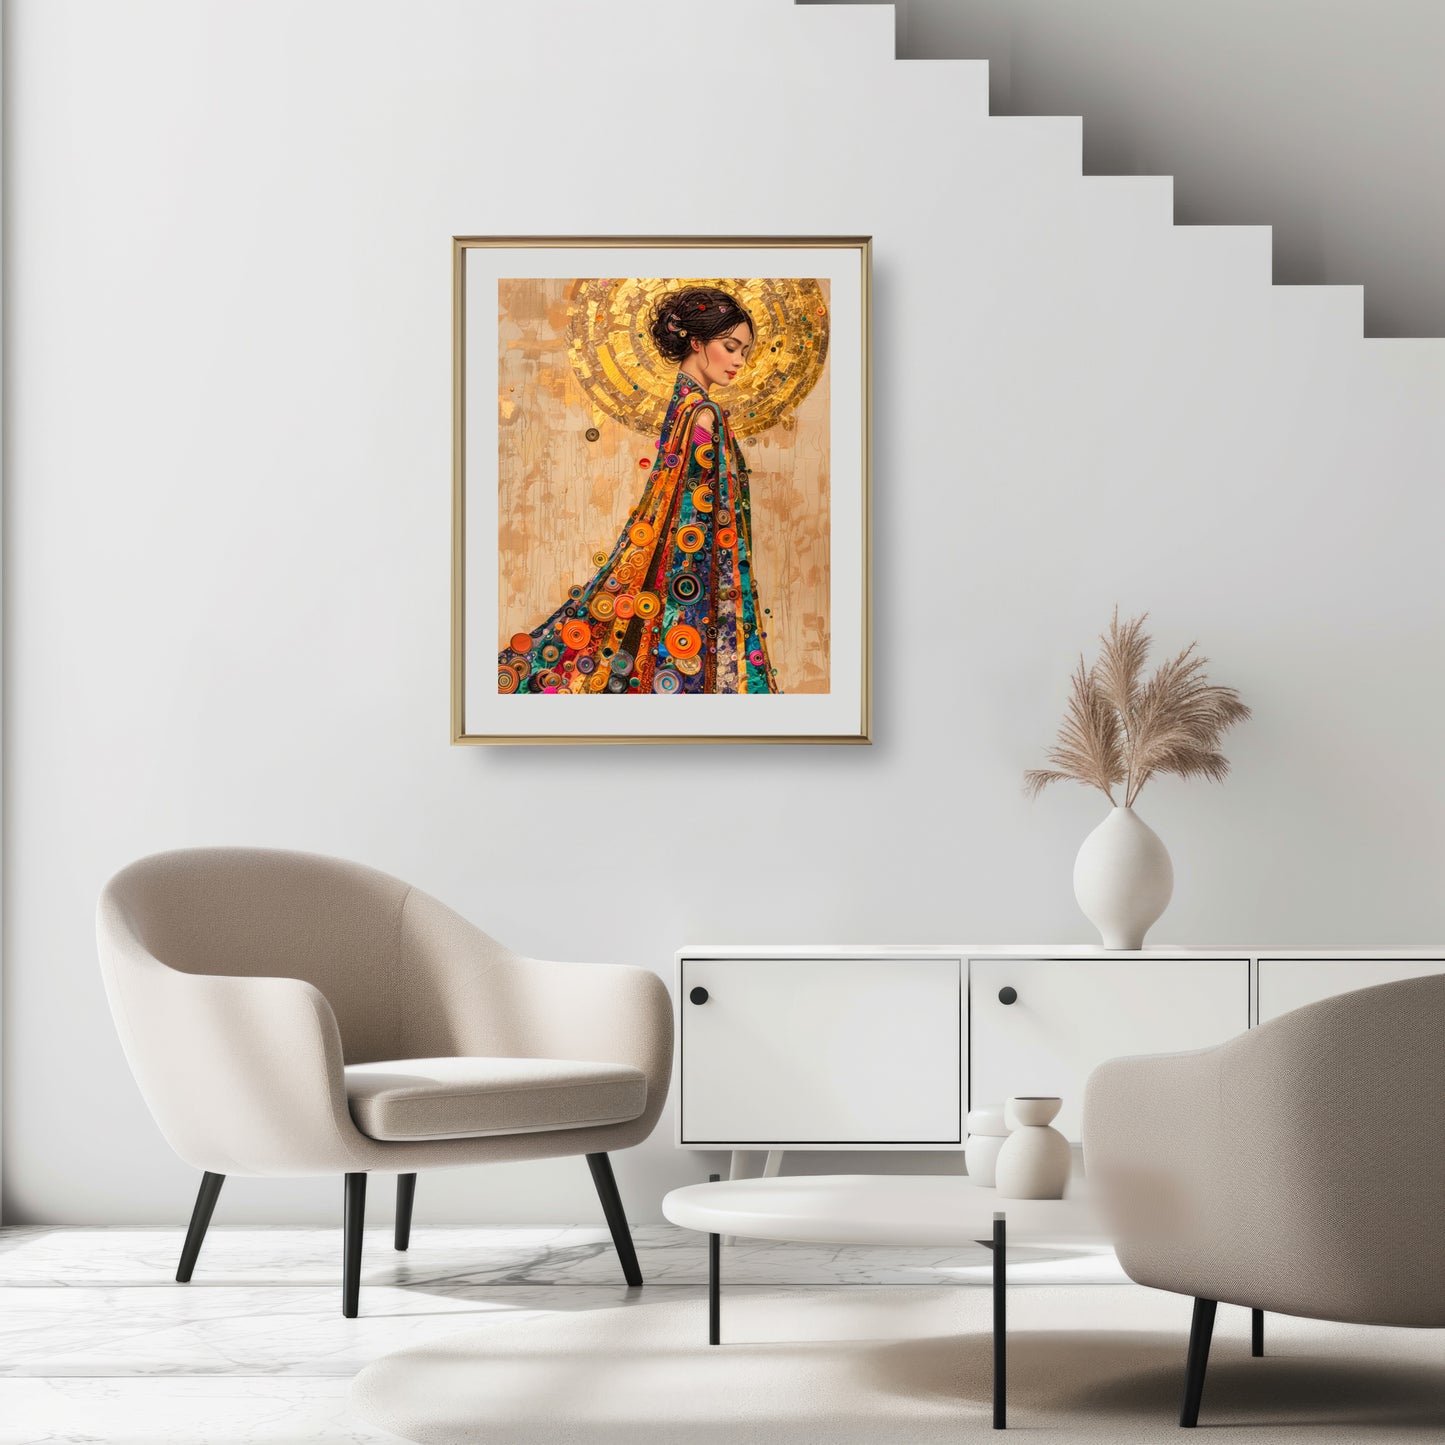 rt print of a woman in a multicolored robe with a golden halo from the Heart Of Gold collection.